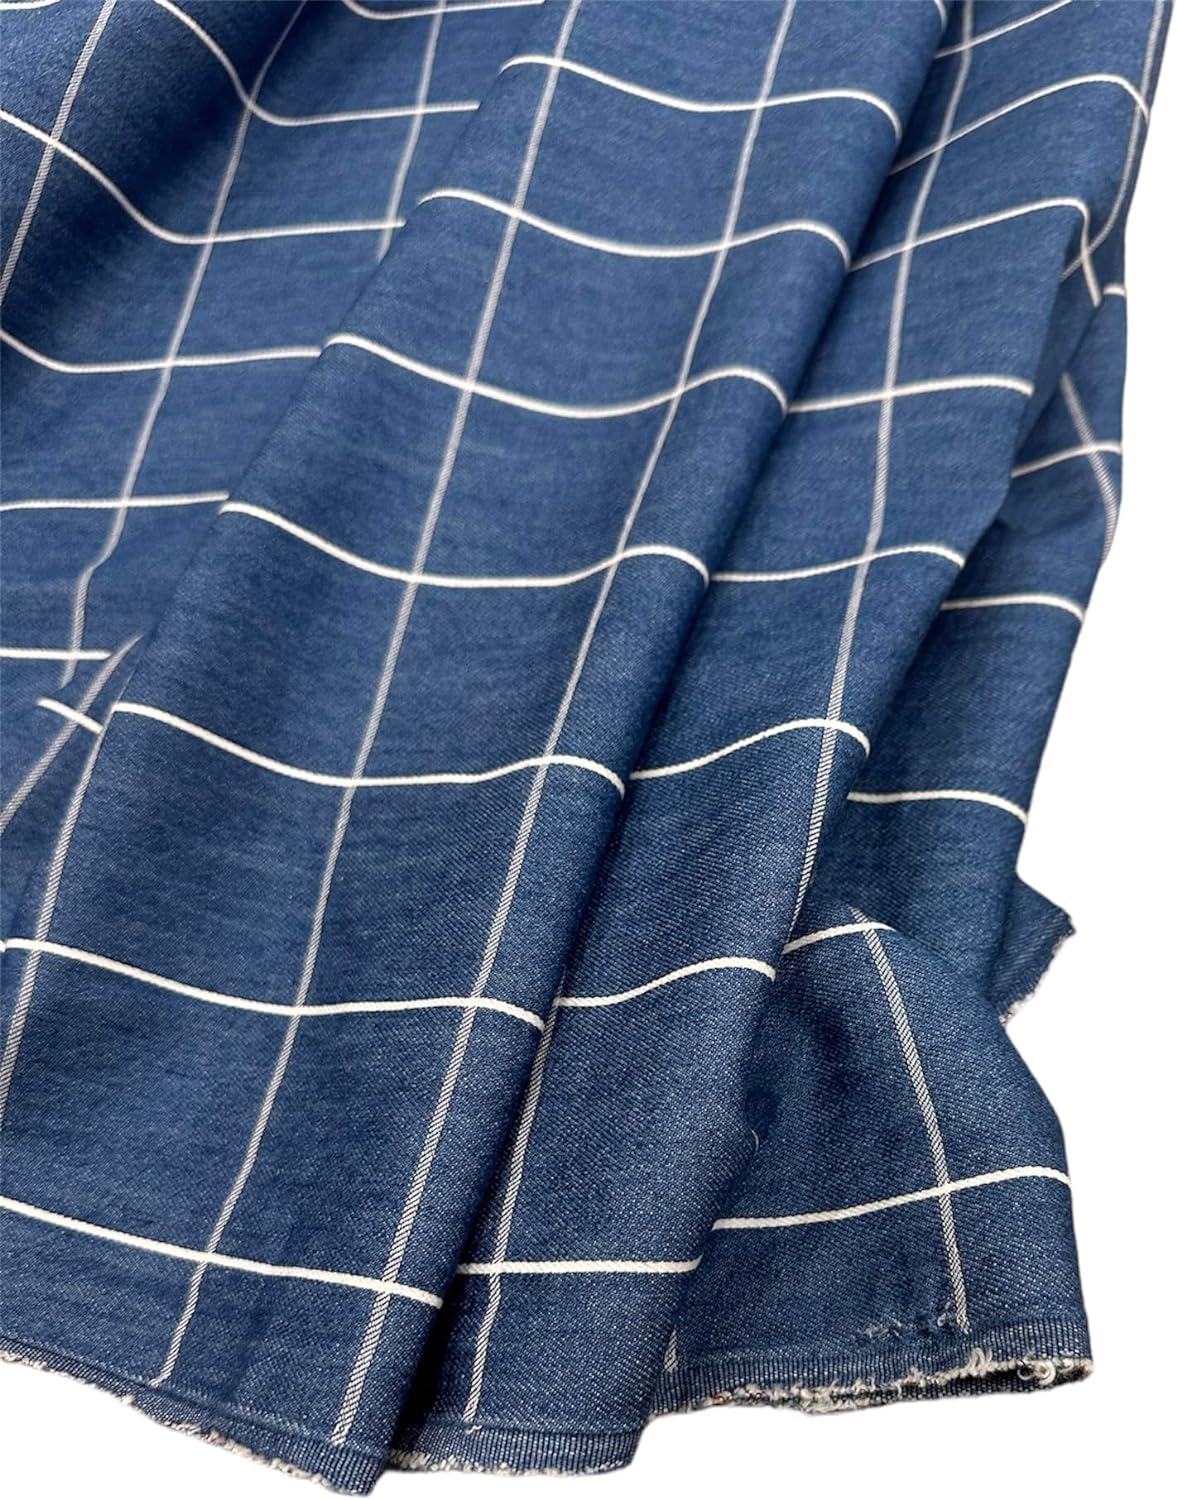 Blue and White Washed Denim Plaid Fabric | Sold by The Yard